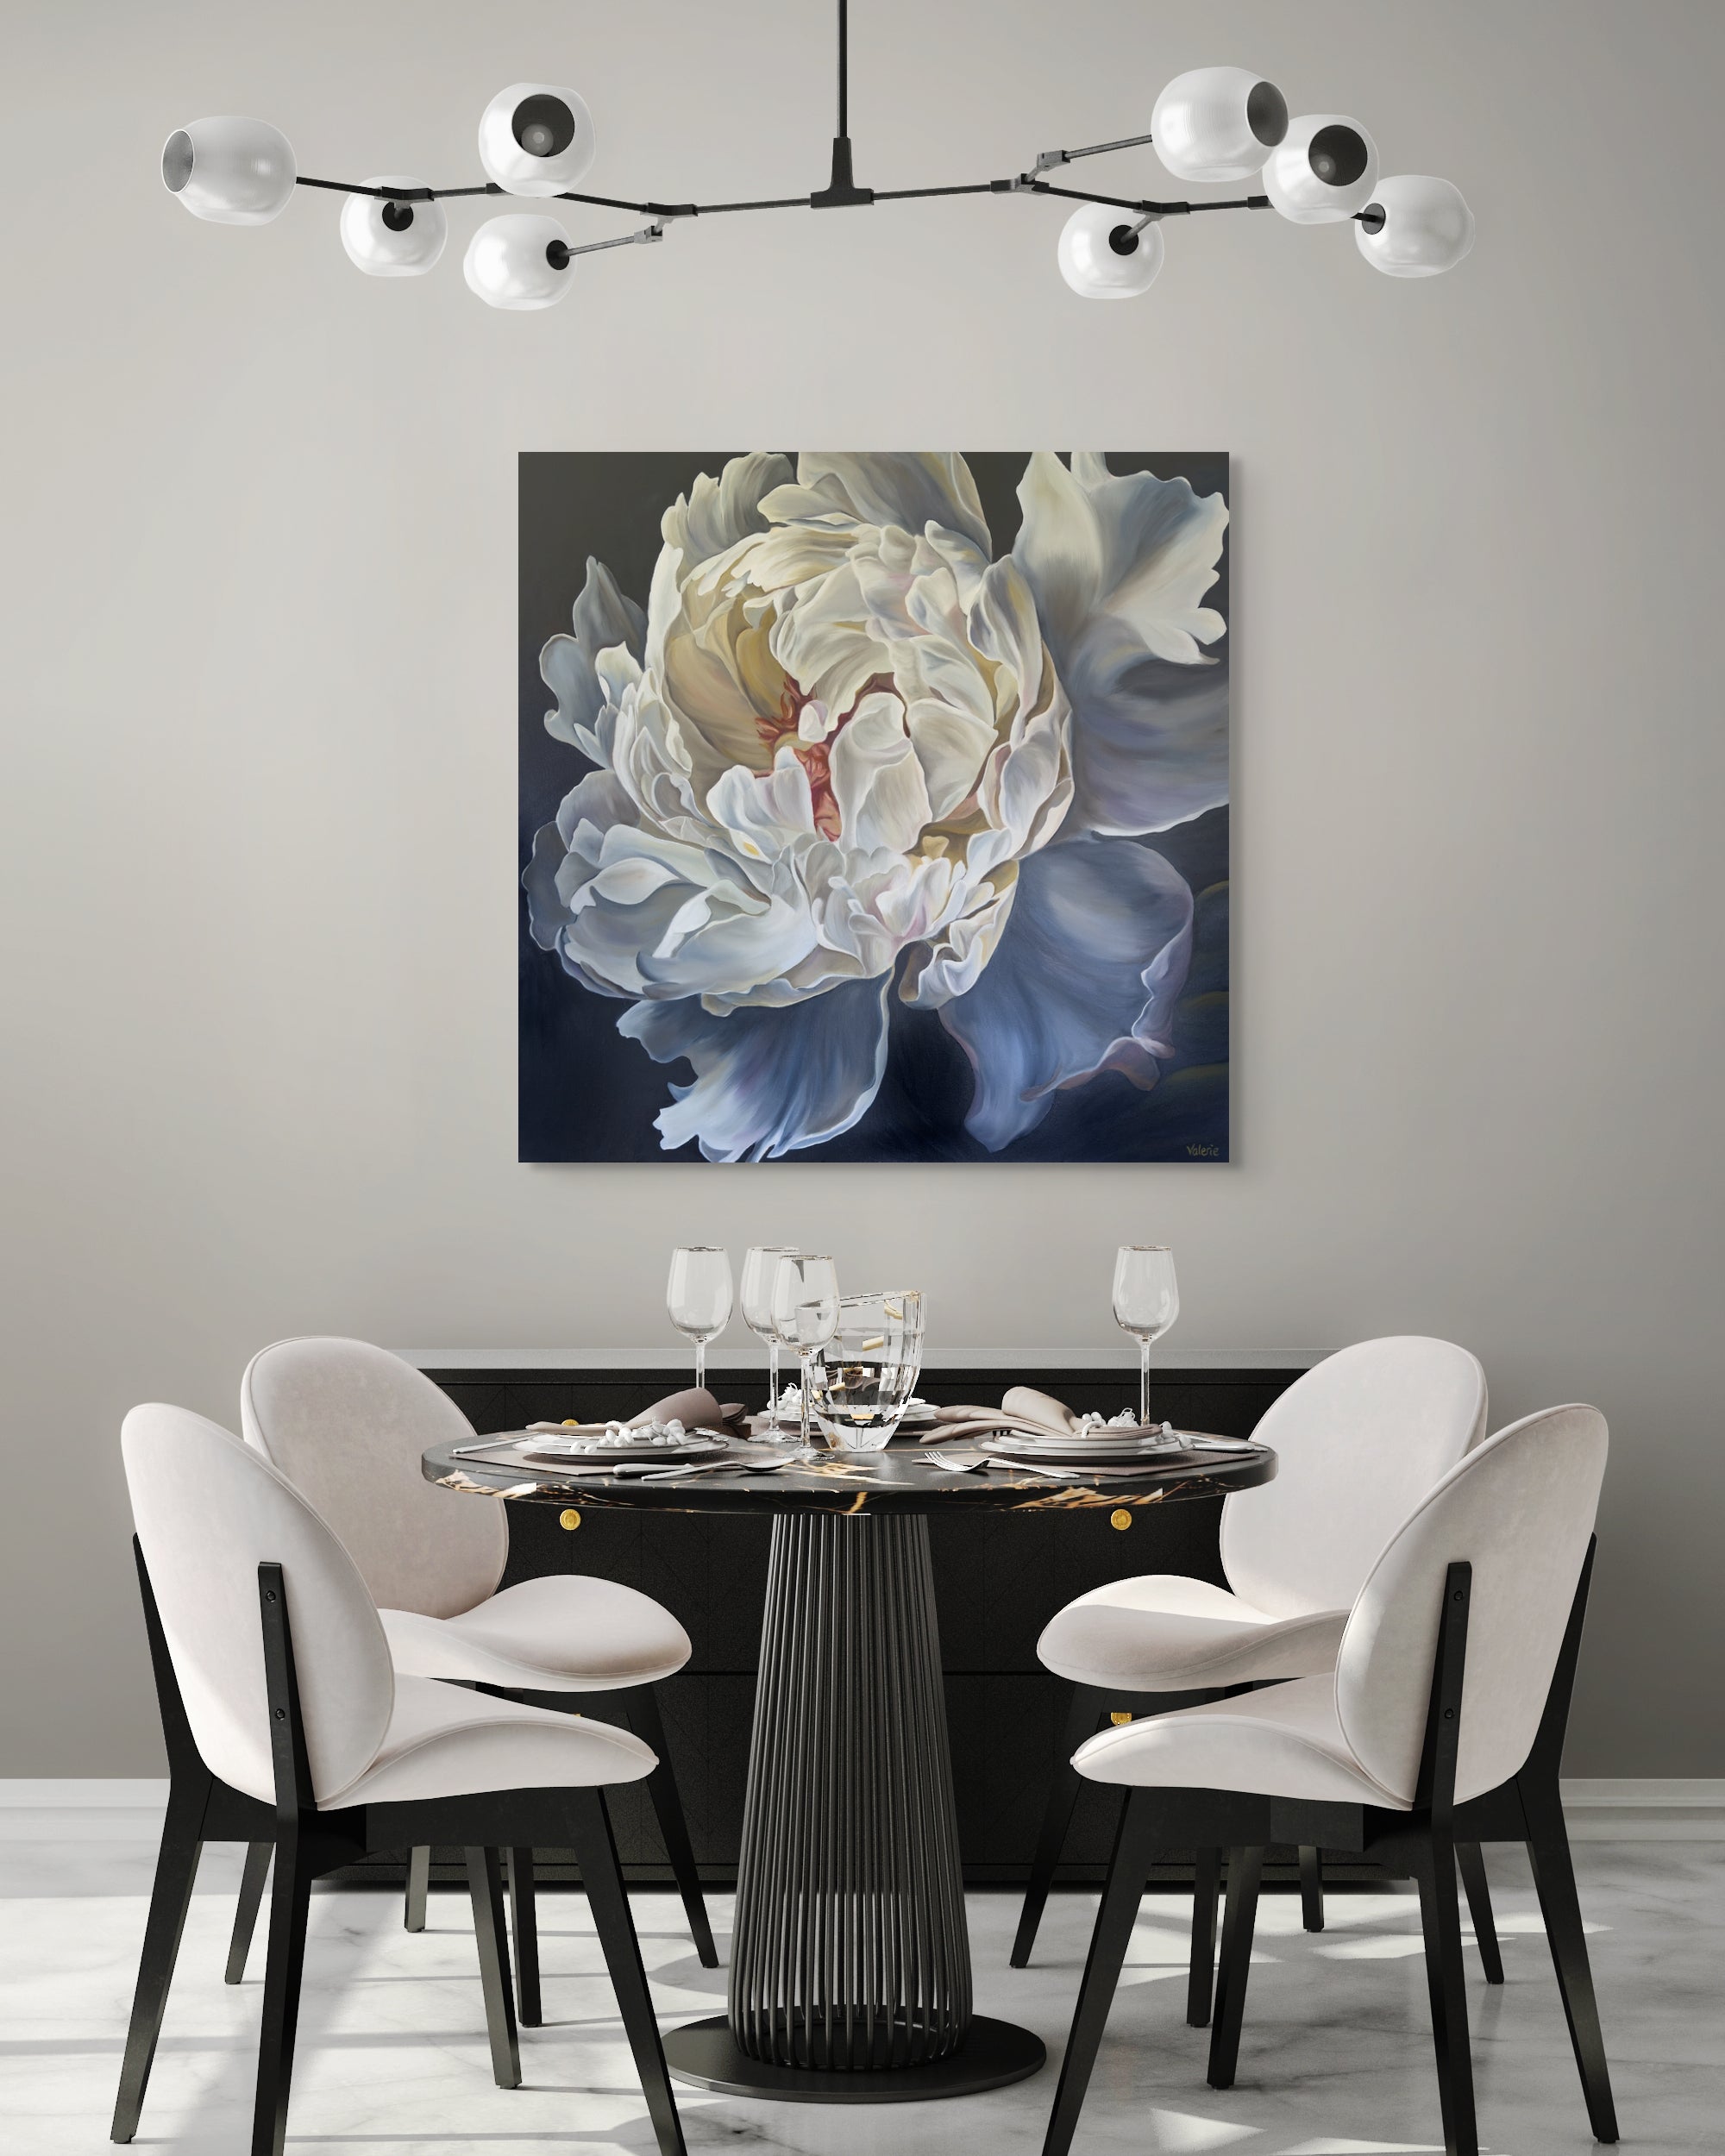 Close up of white peony with moody lighting in dining room